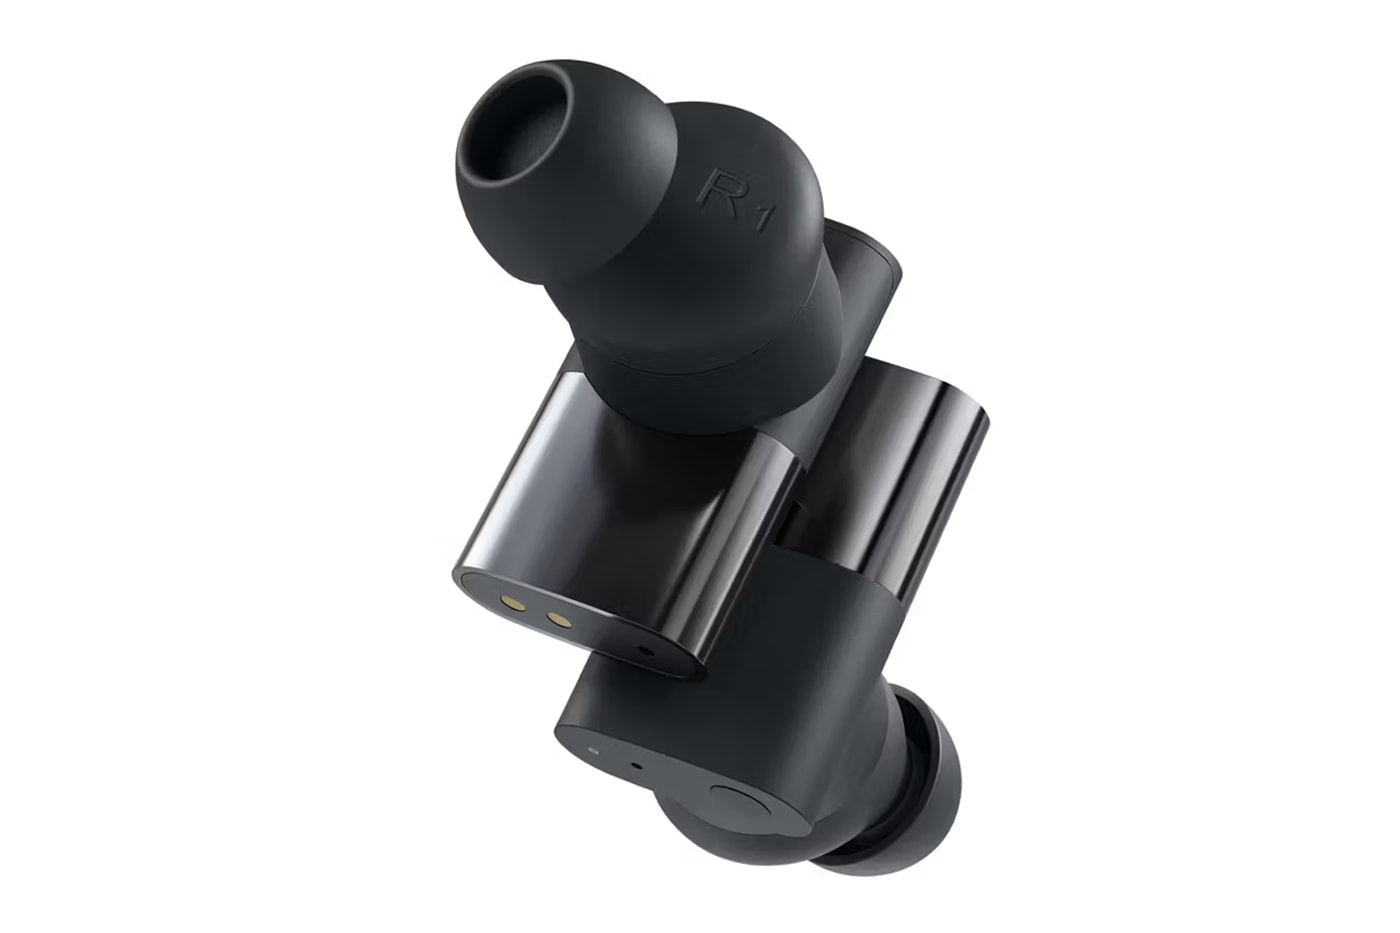 Status Audio's Between 3ANC Wireless Earbuds Look to Bring Audiophile Quality to the Masses